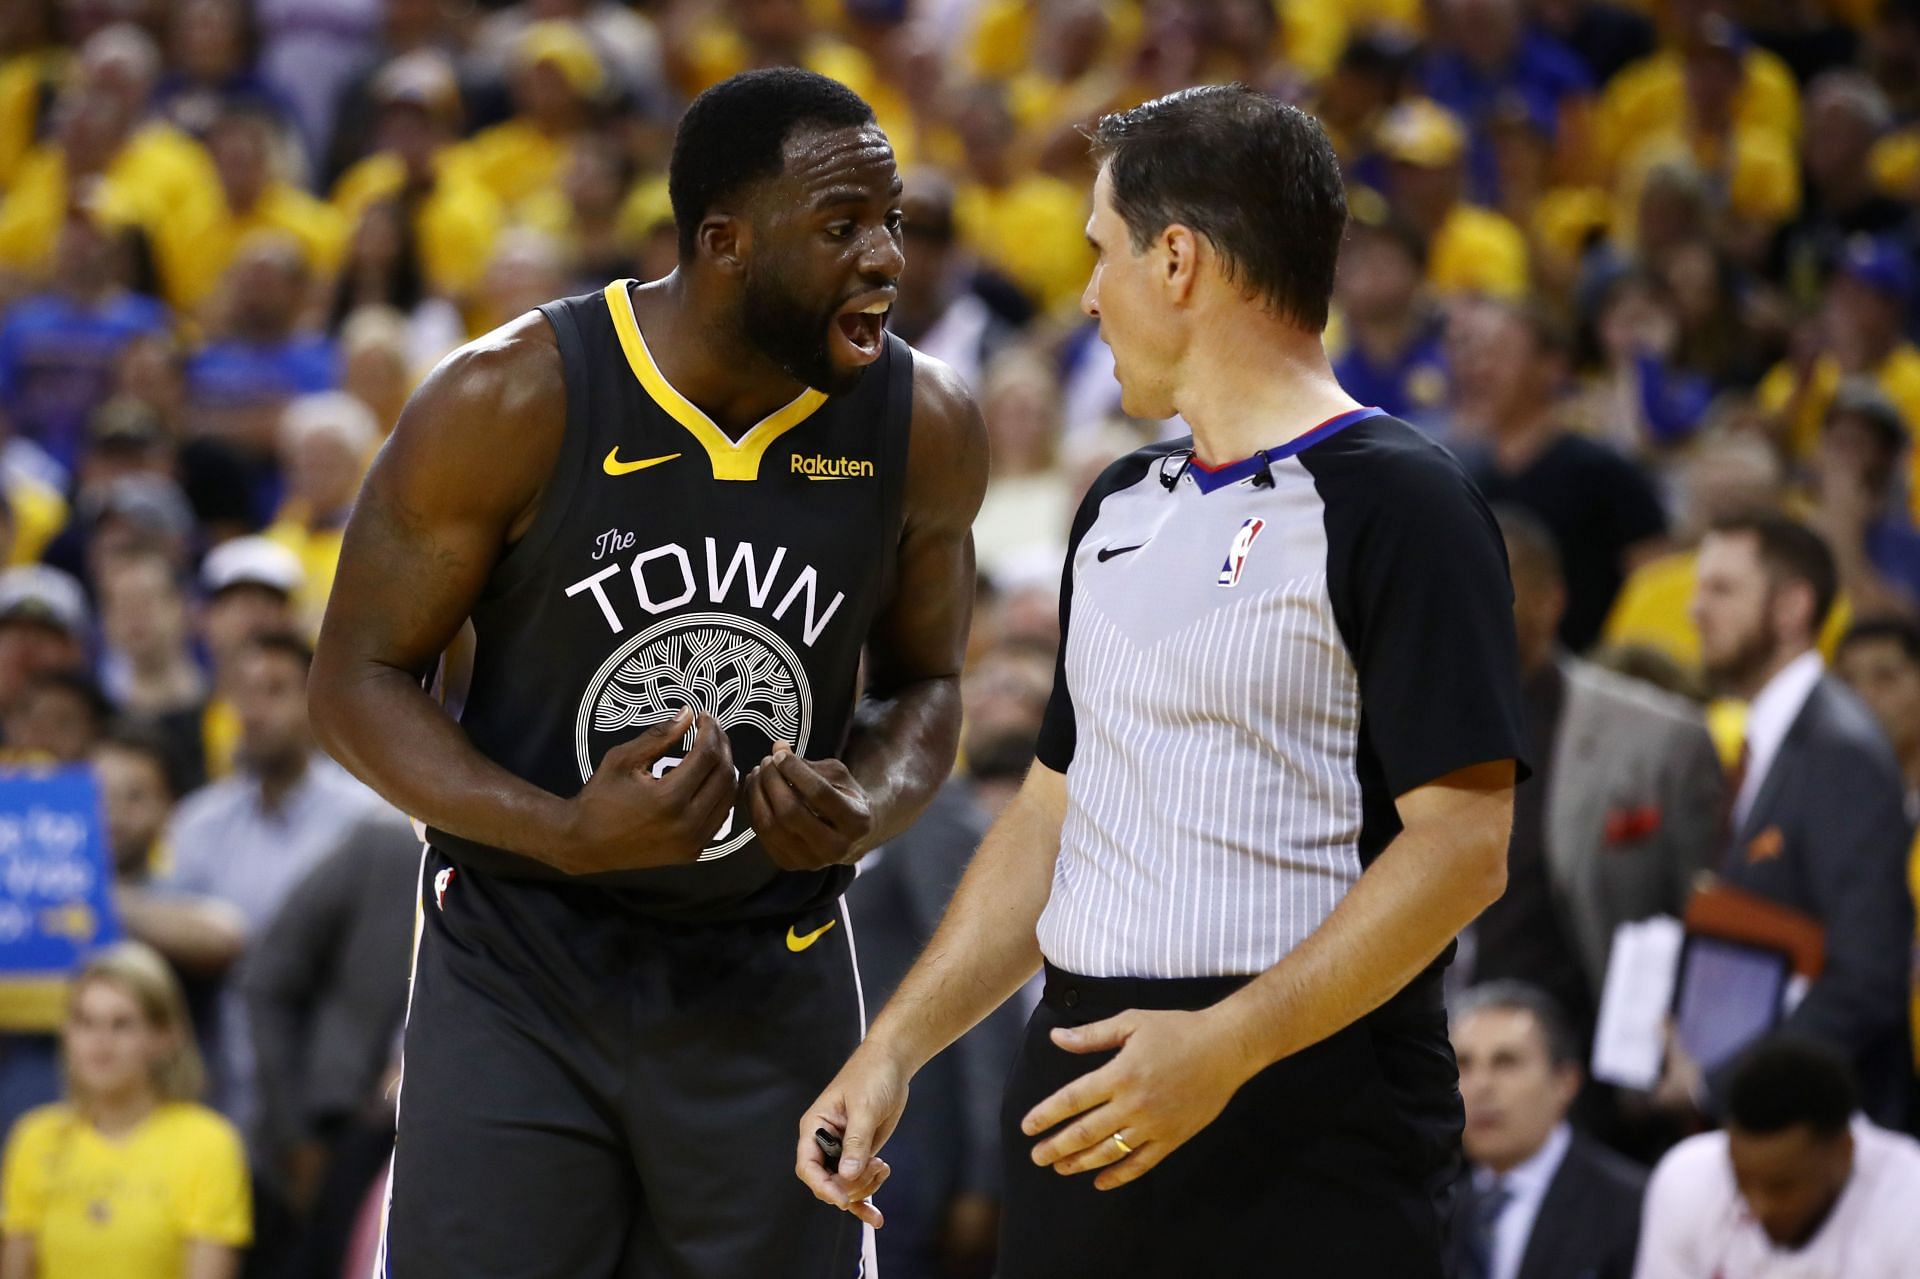 Draymond Green in an arguement with a referee during the 2019 NBA Finals